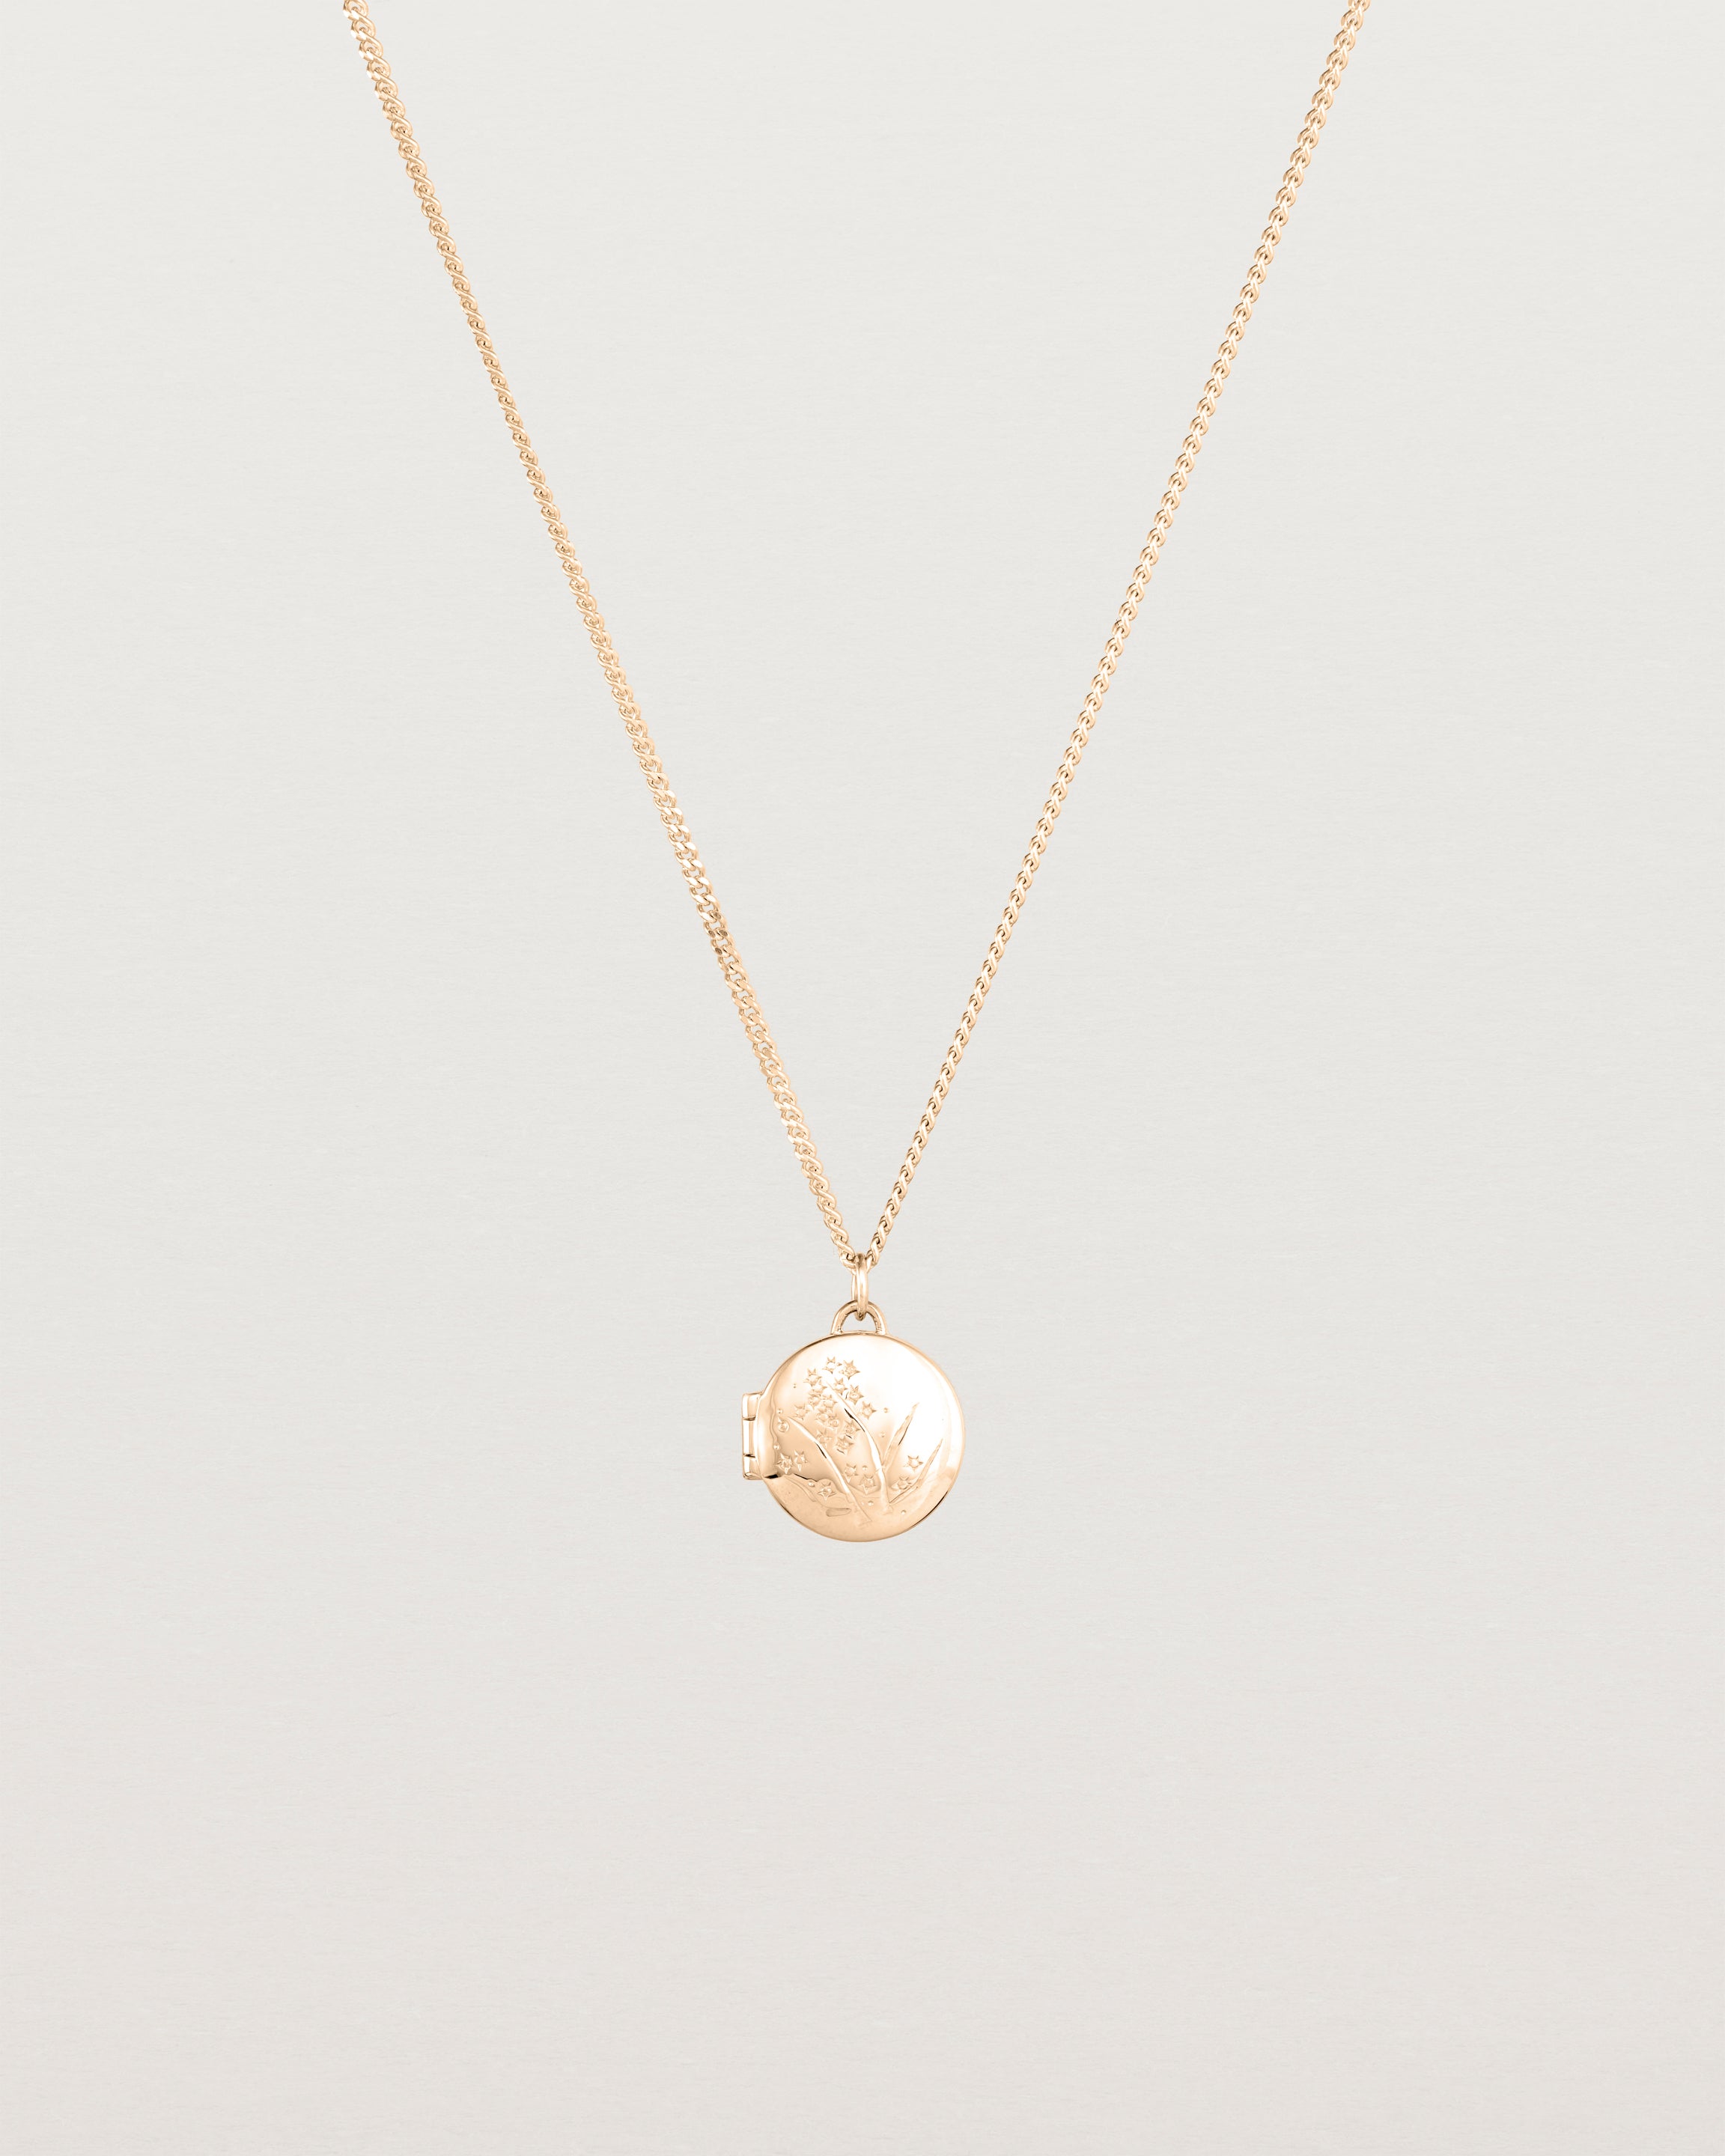 Front view of the Golden Wattle Locket in rose gold.